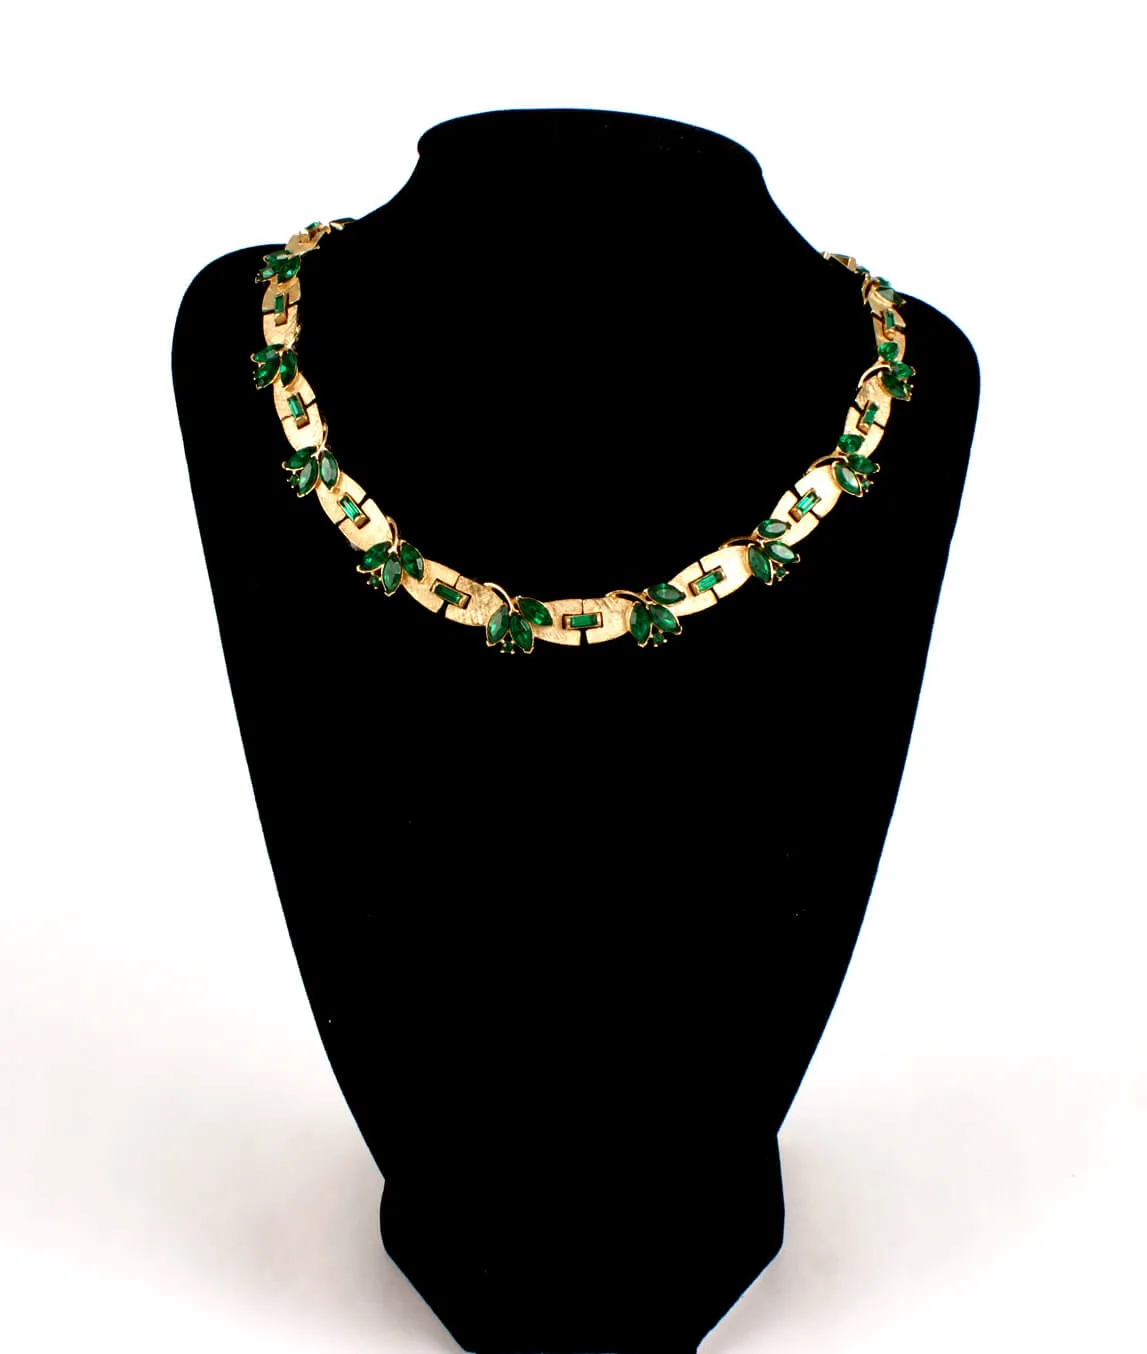 Trifari green and gold necklace